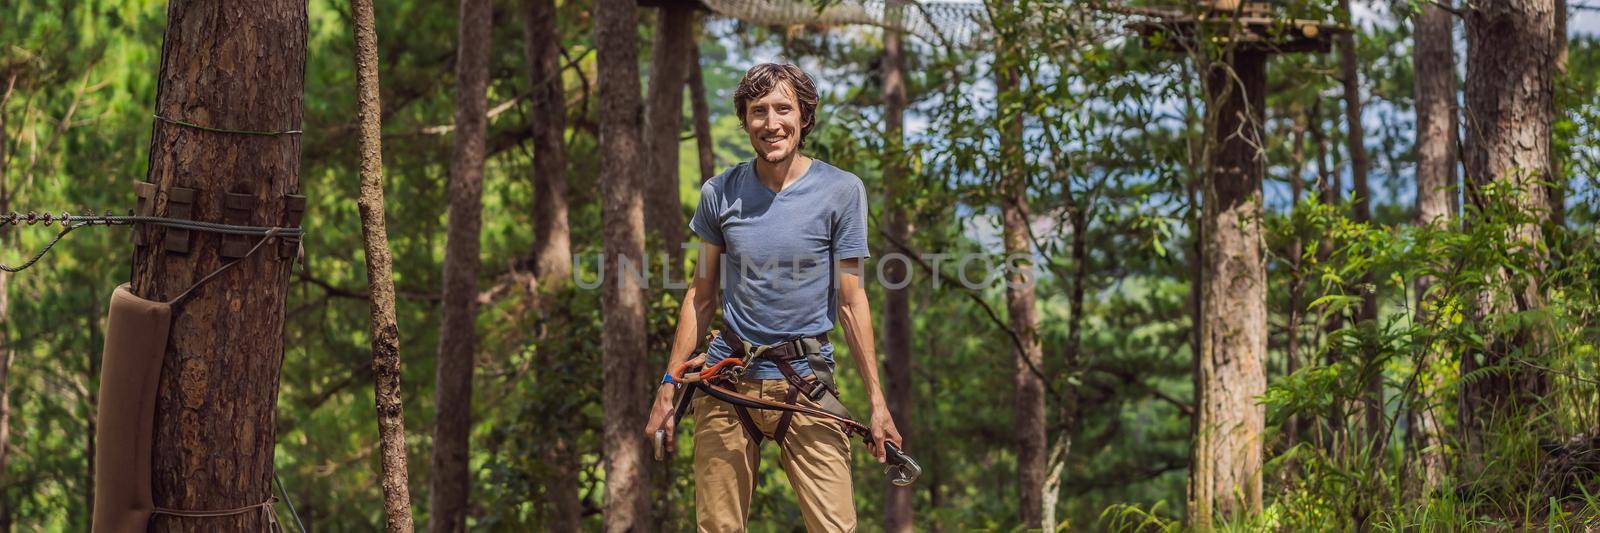 Young attractive man in adventure rope park in safety equipment. BANNER, LONG FORMAT